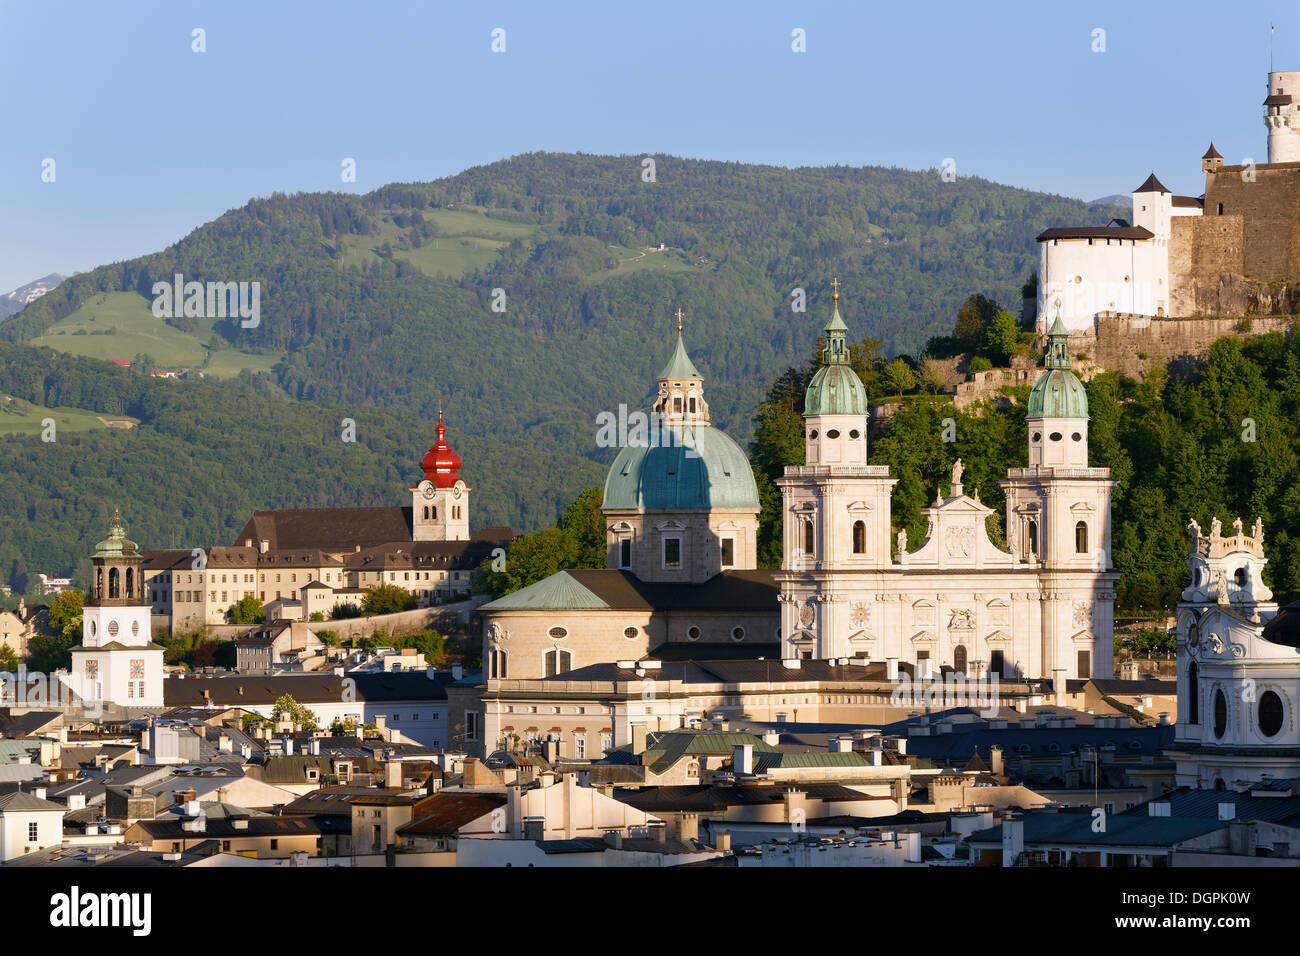 Links Glockenspiel, Nonnberg Abbey, Cathedral, historic town centre, view from Moenchsberg Mountain, Salzburg, Salzburg State Stock Photo